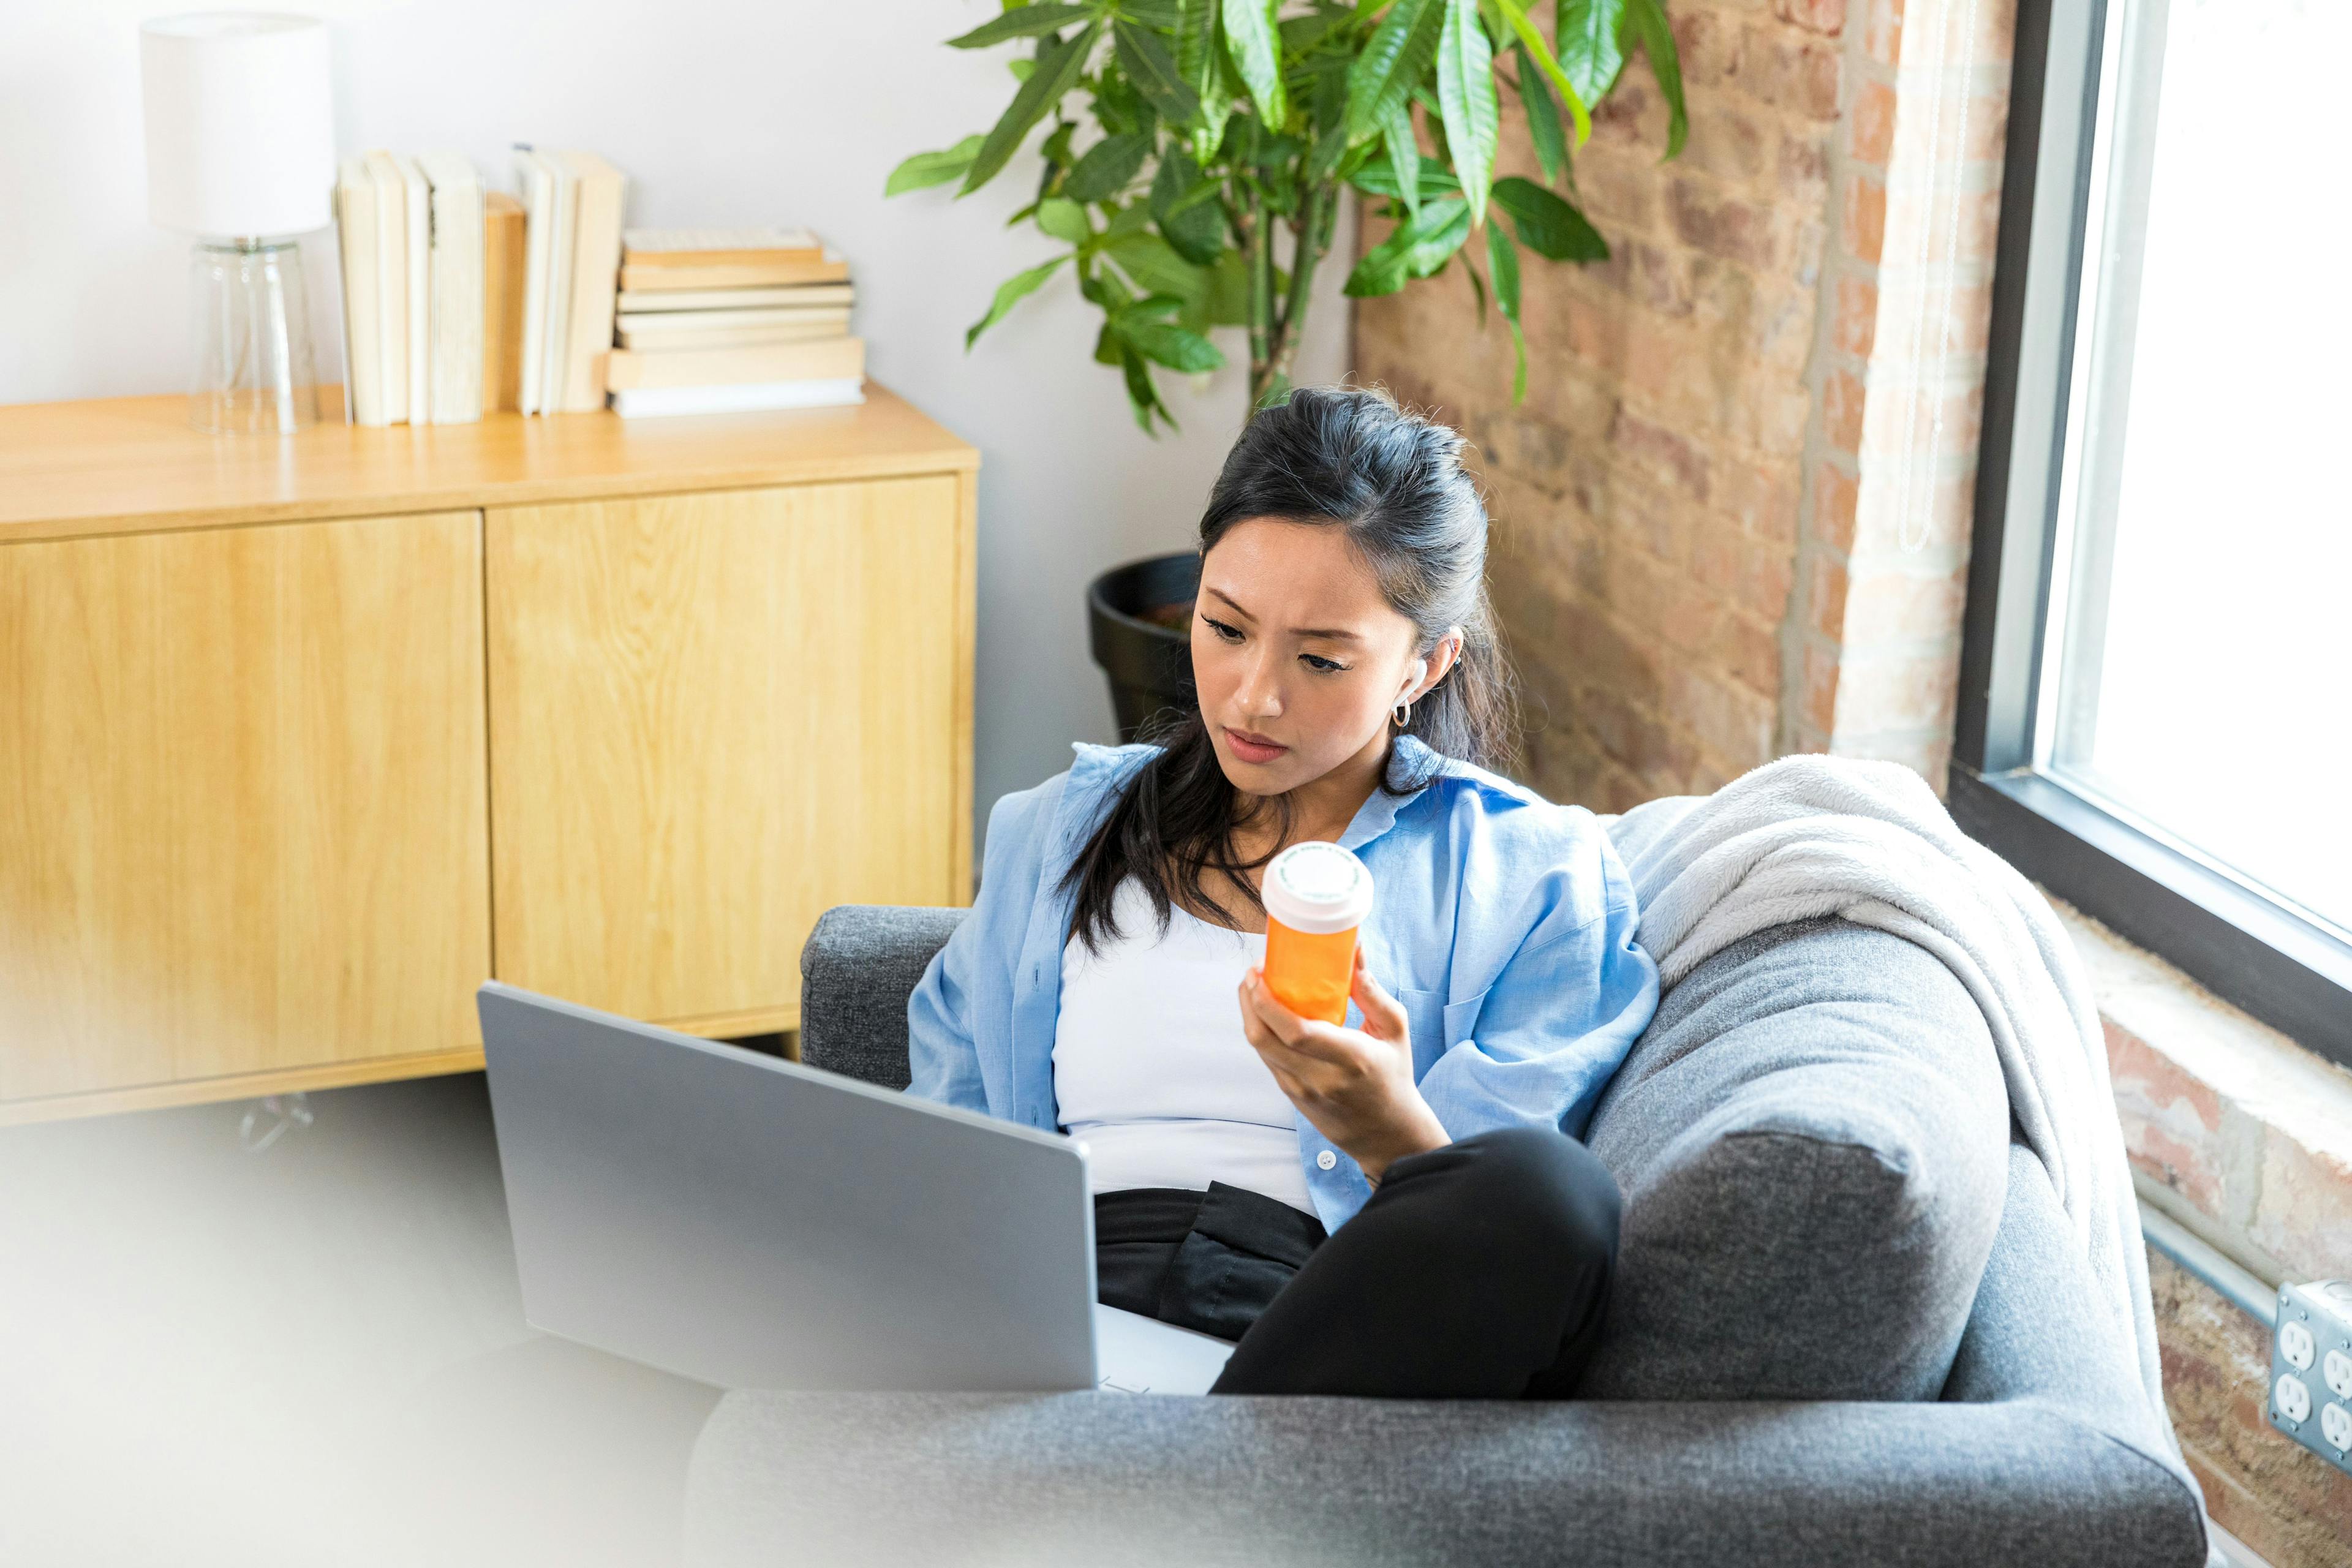 A woman sits on her couch holding a pill bottle in one hand and her laptop in the other.